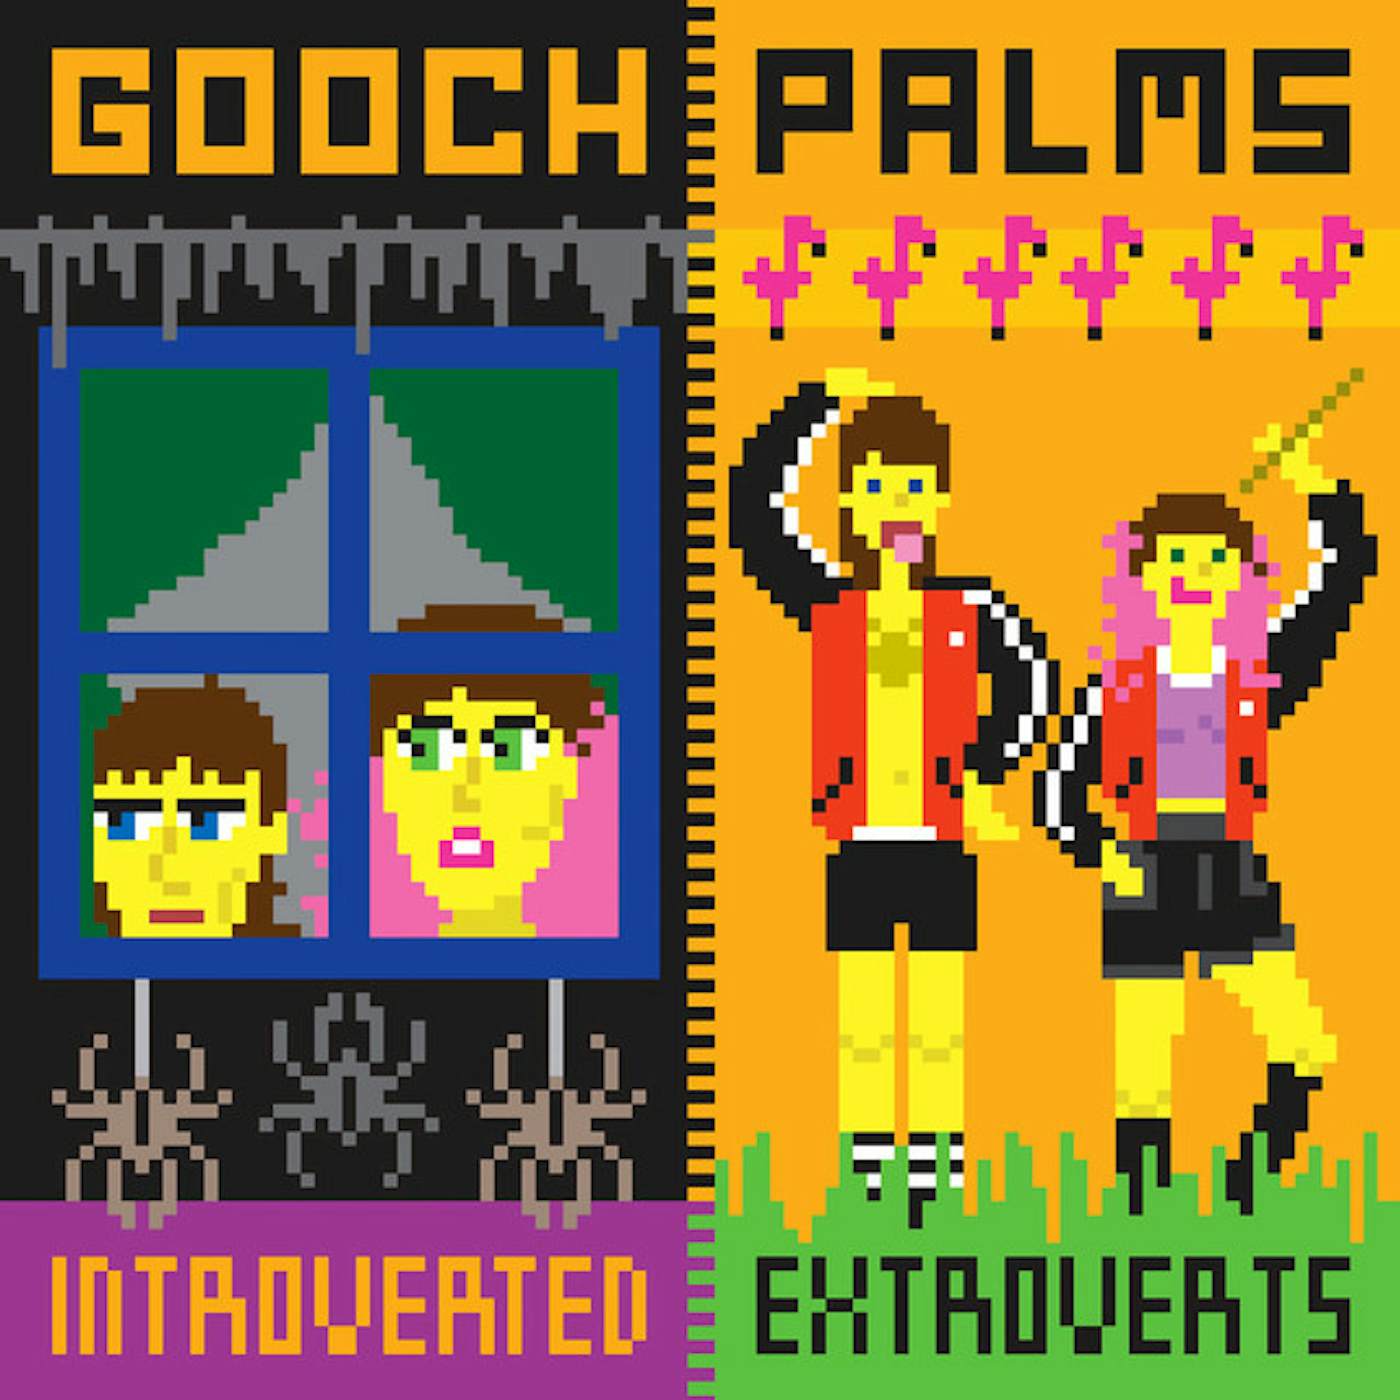 The Gooch Palms Introverted Extroverts Vinyl Record